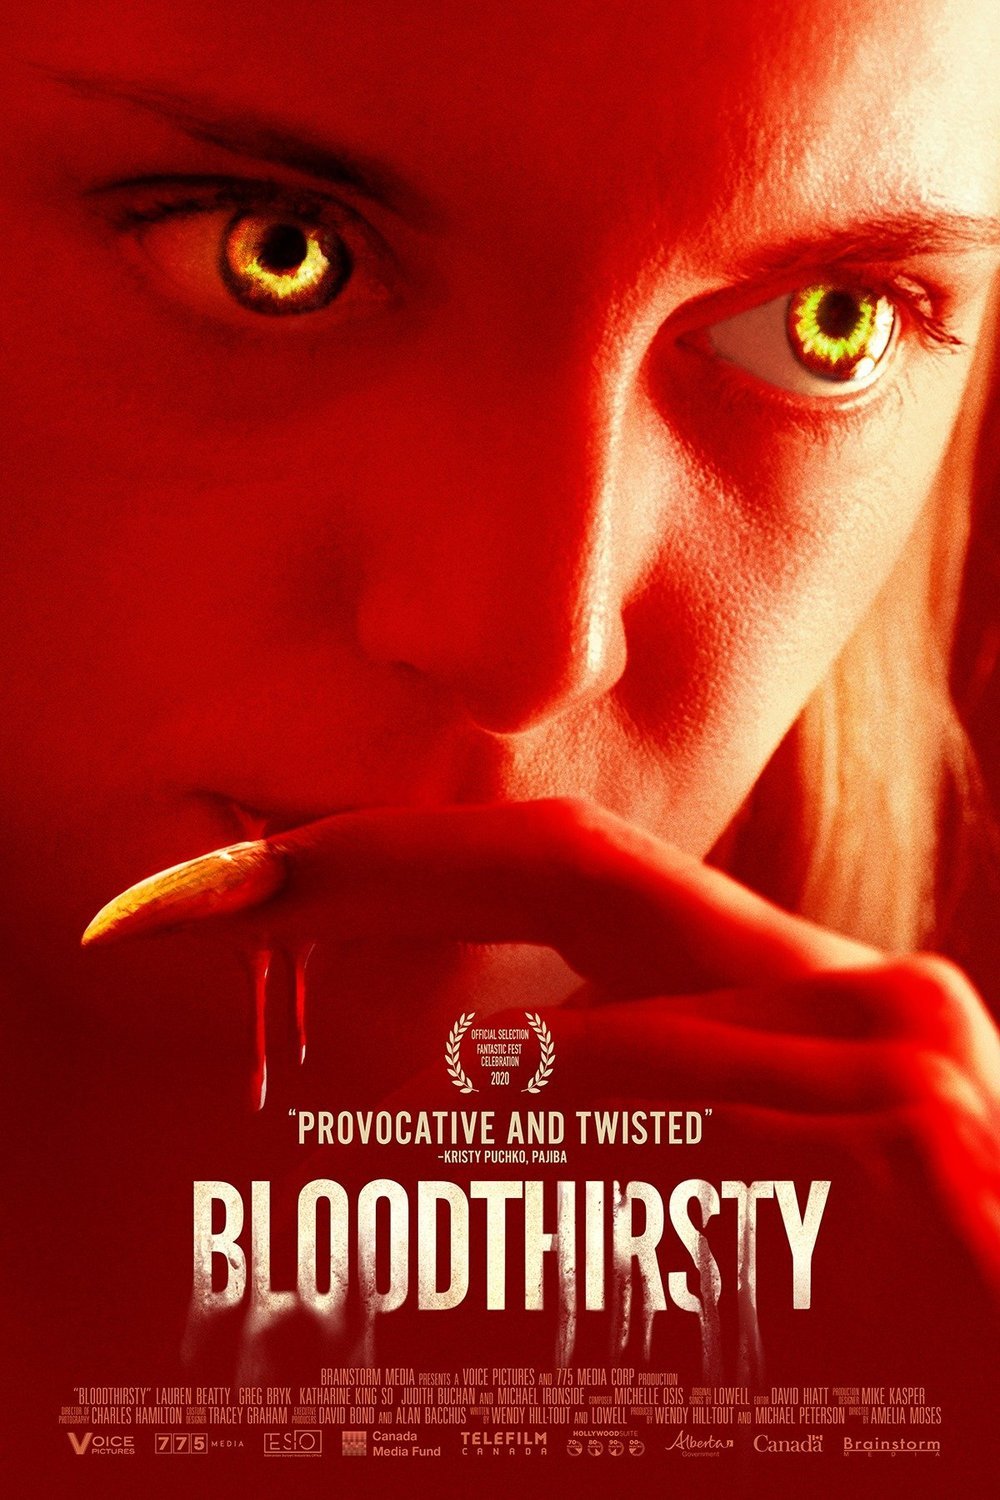 Poster of the movie Bloodthirsty